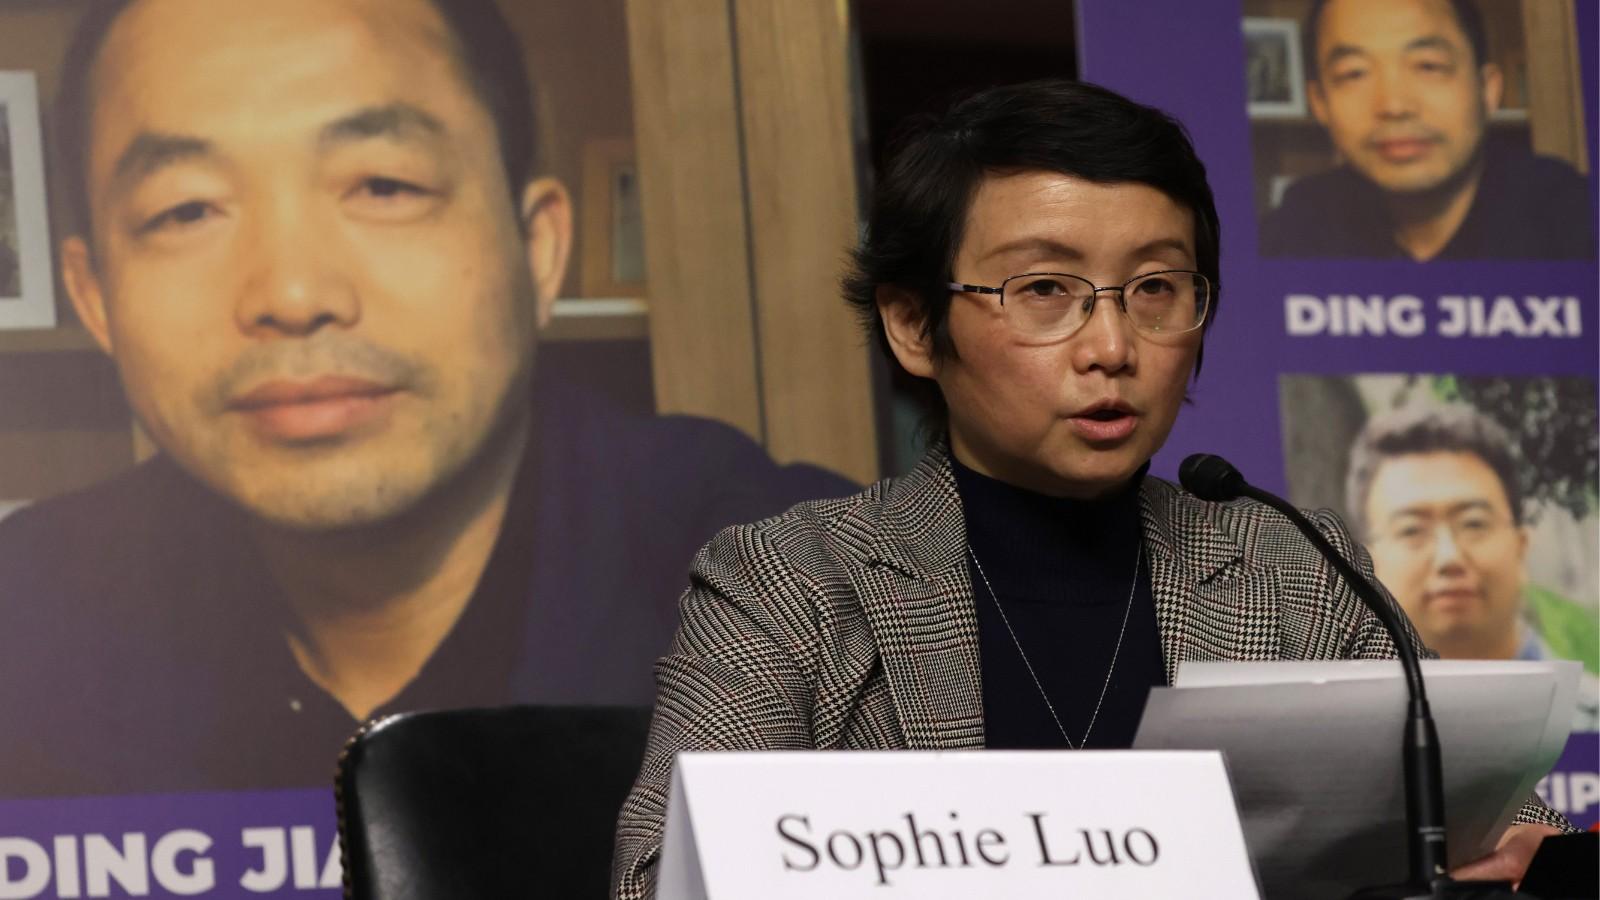 As a photo of her husband Chinese human rights activist Ding Jiaxi is on display in the background, Sophie Luo testifies during a hearing before The Congressional-Executive Commission on China (CECC) at Dirksen Senate Office Building on Capitol Hill on Fe